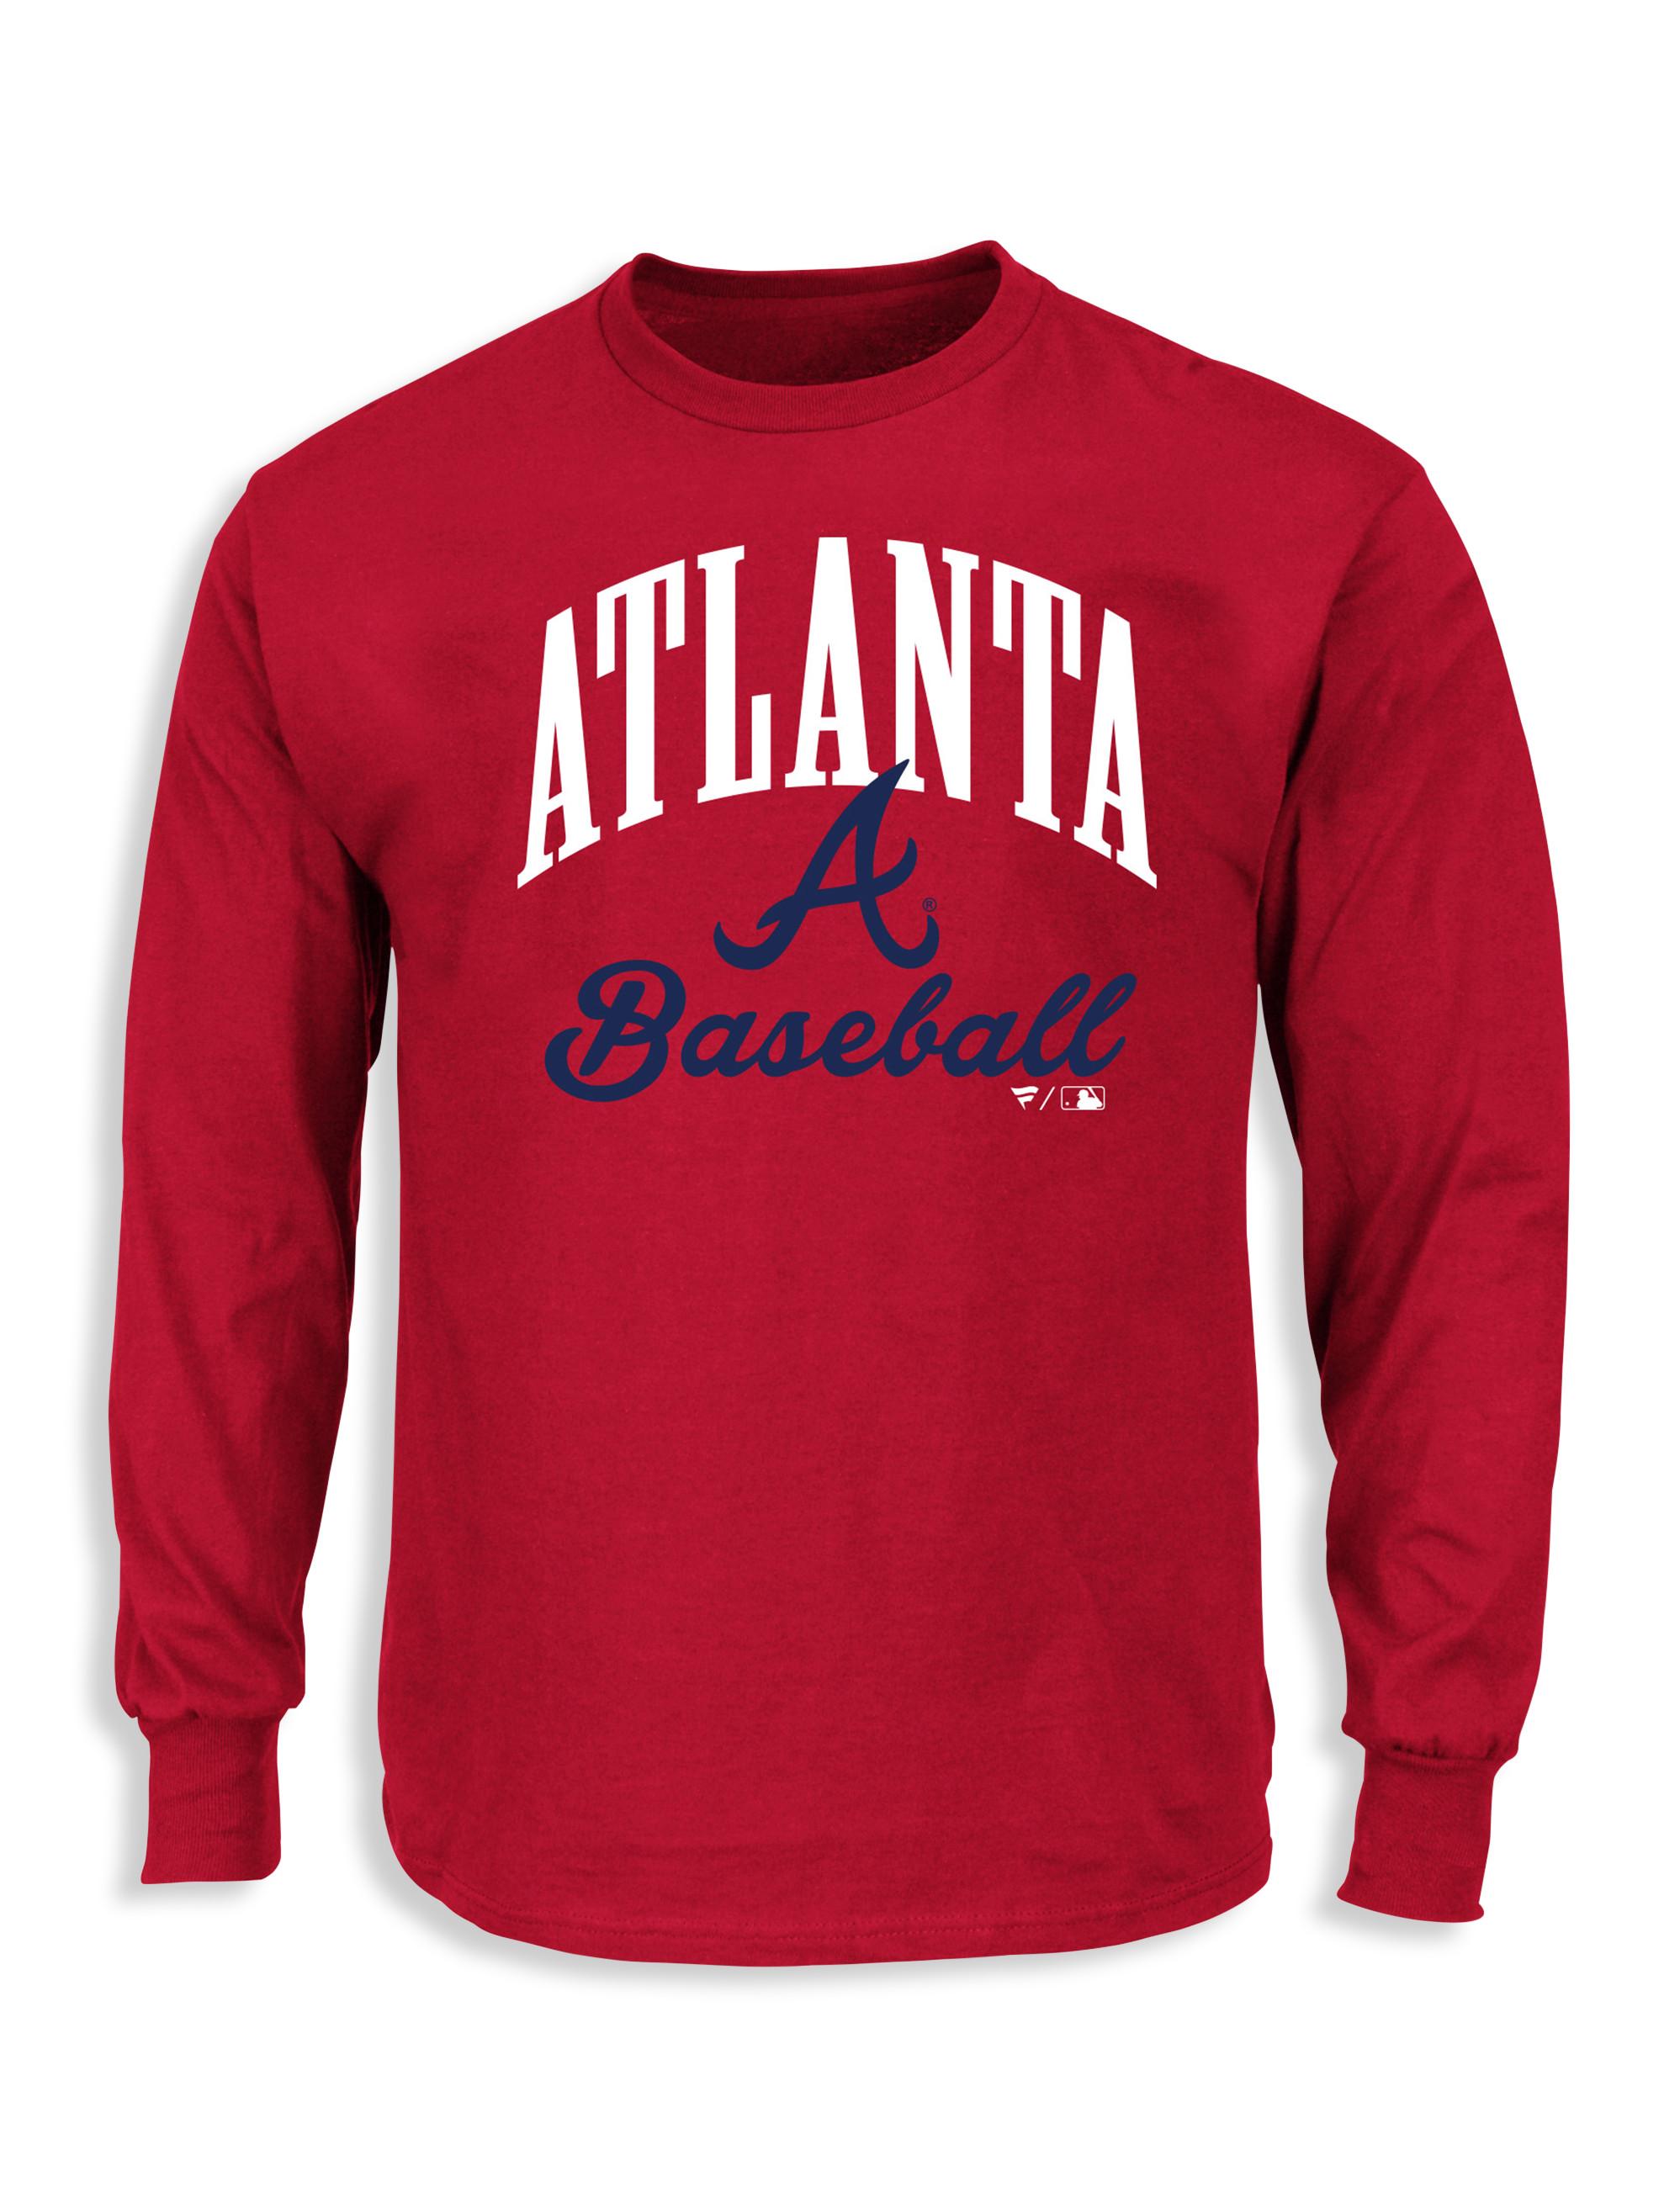 MLB Big & Tall Long-sleeve T-shirt in Red for Men